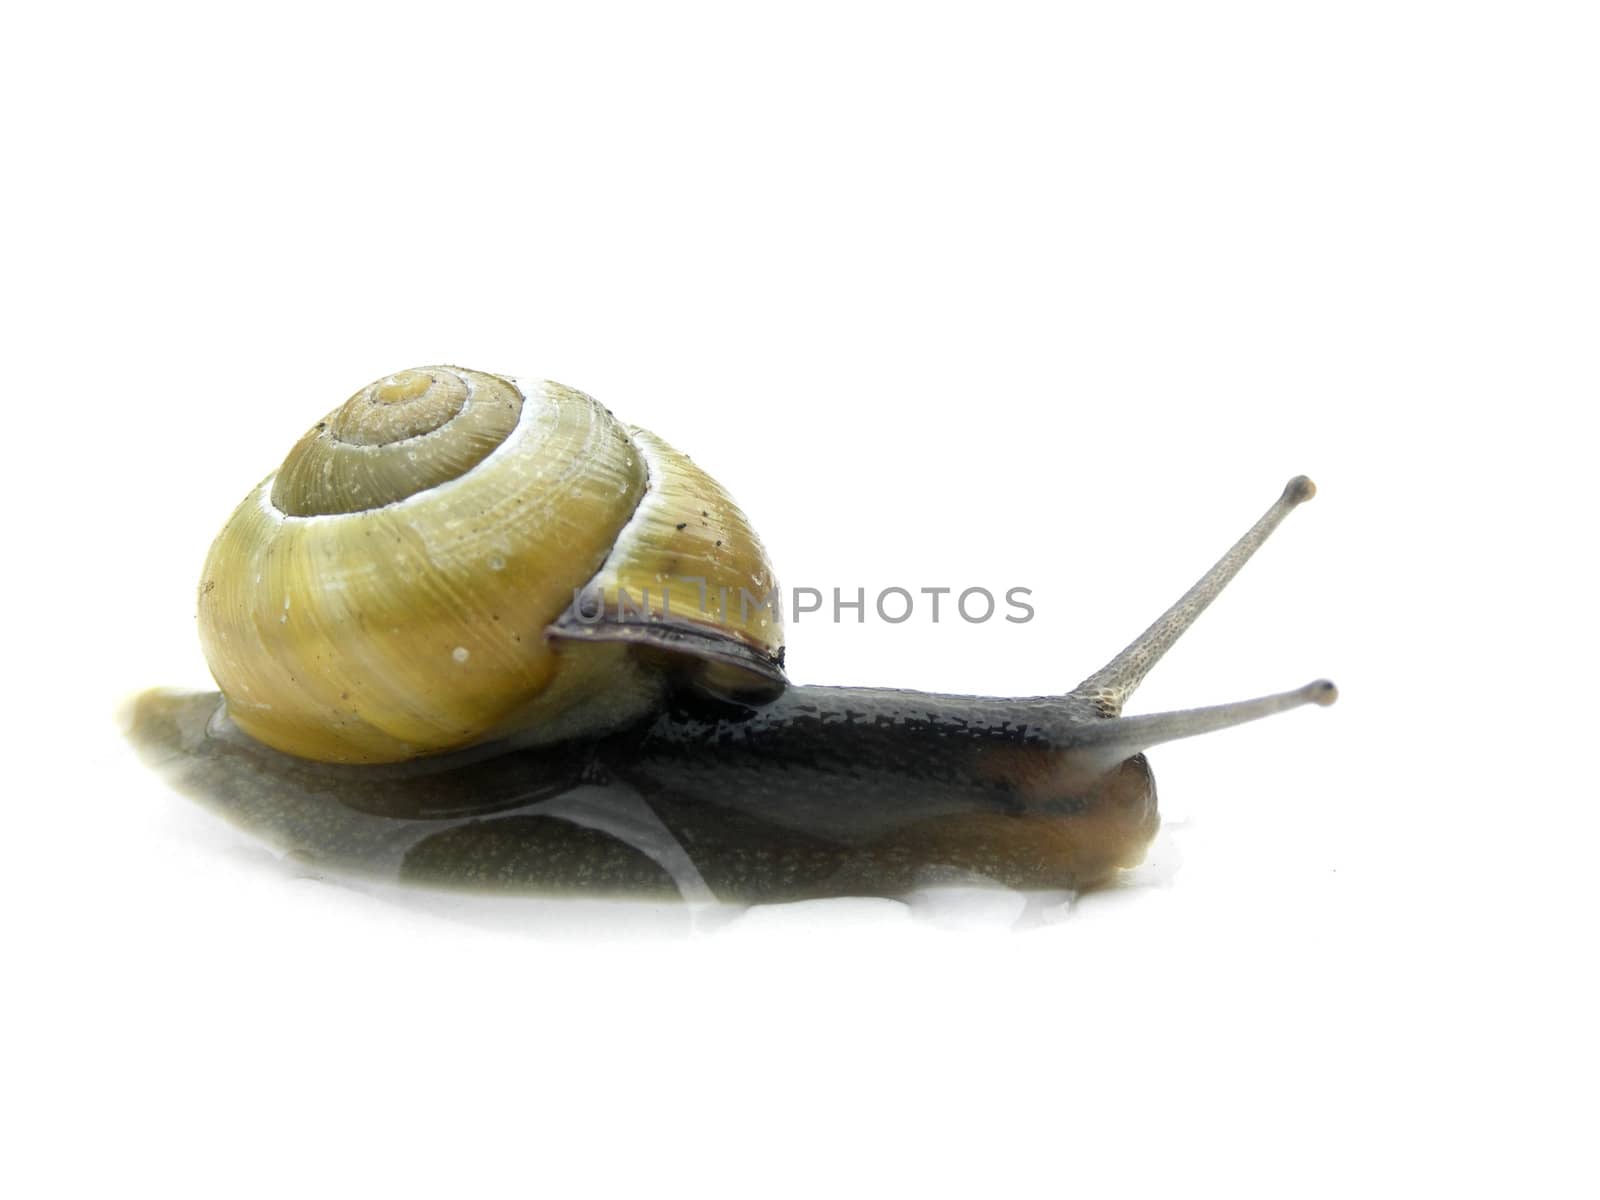 Snail on a white background.